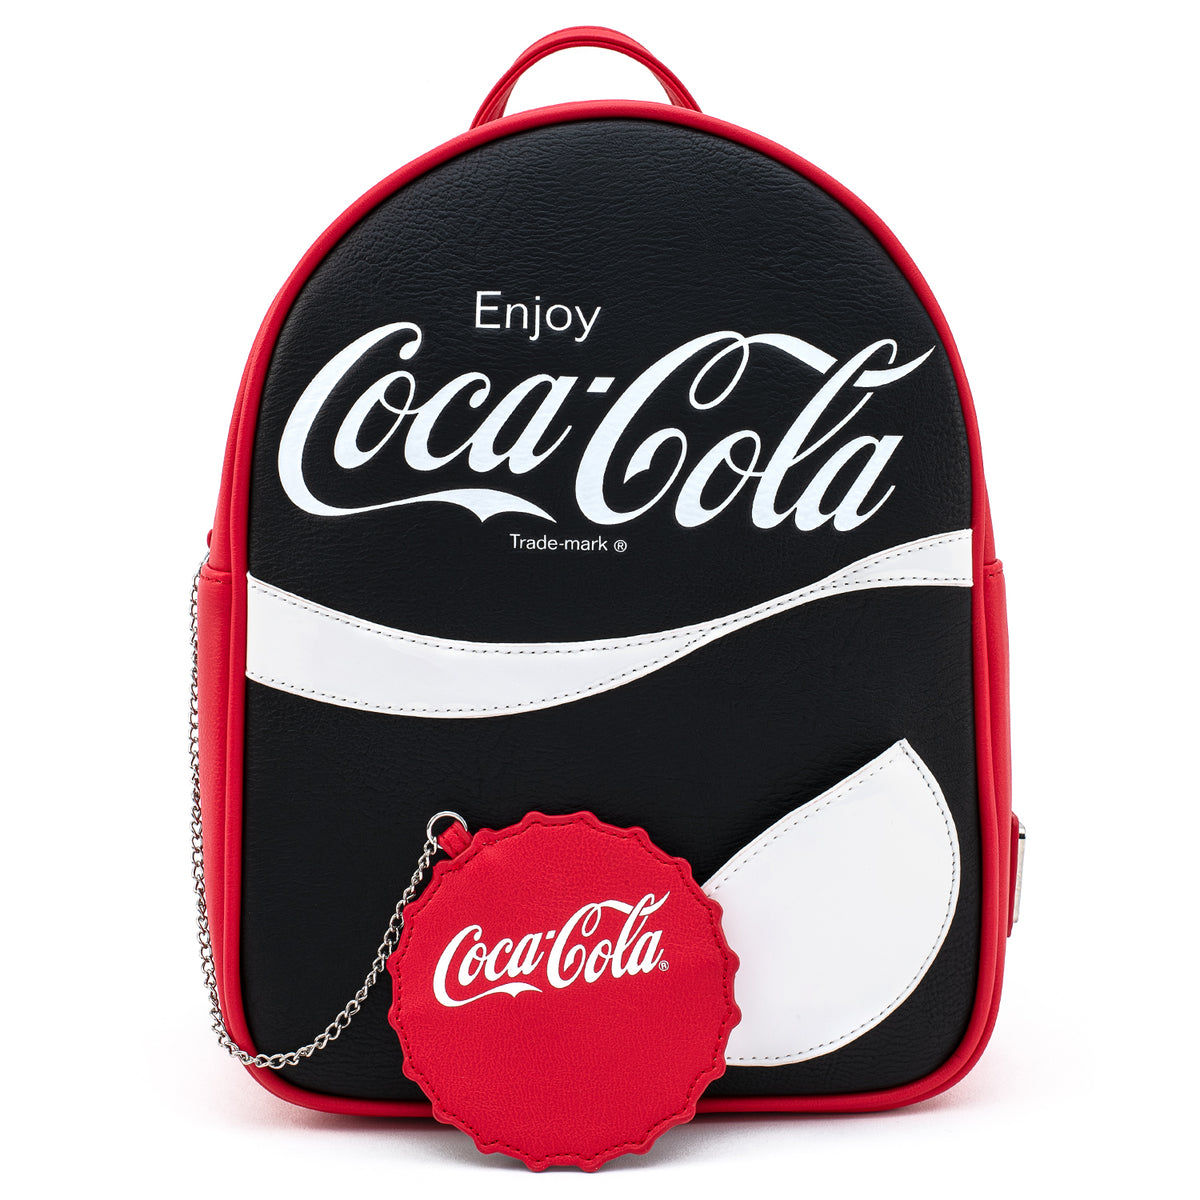 Coca Cola Logo With Coin Purse Mini Backpack Loungefly Com